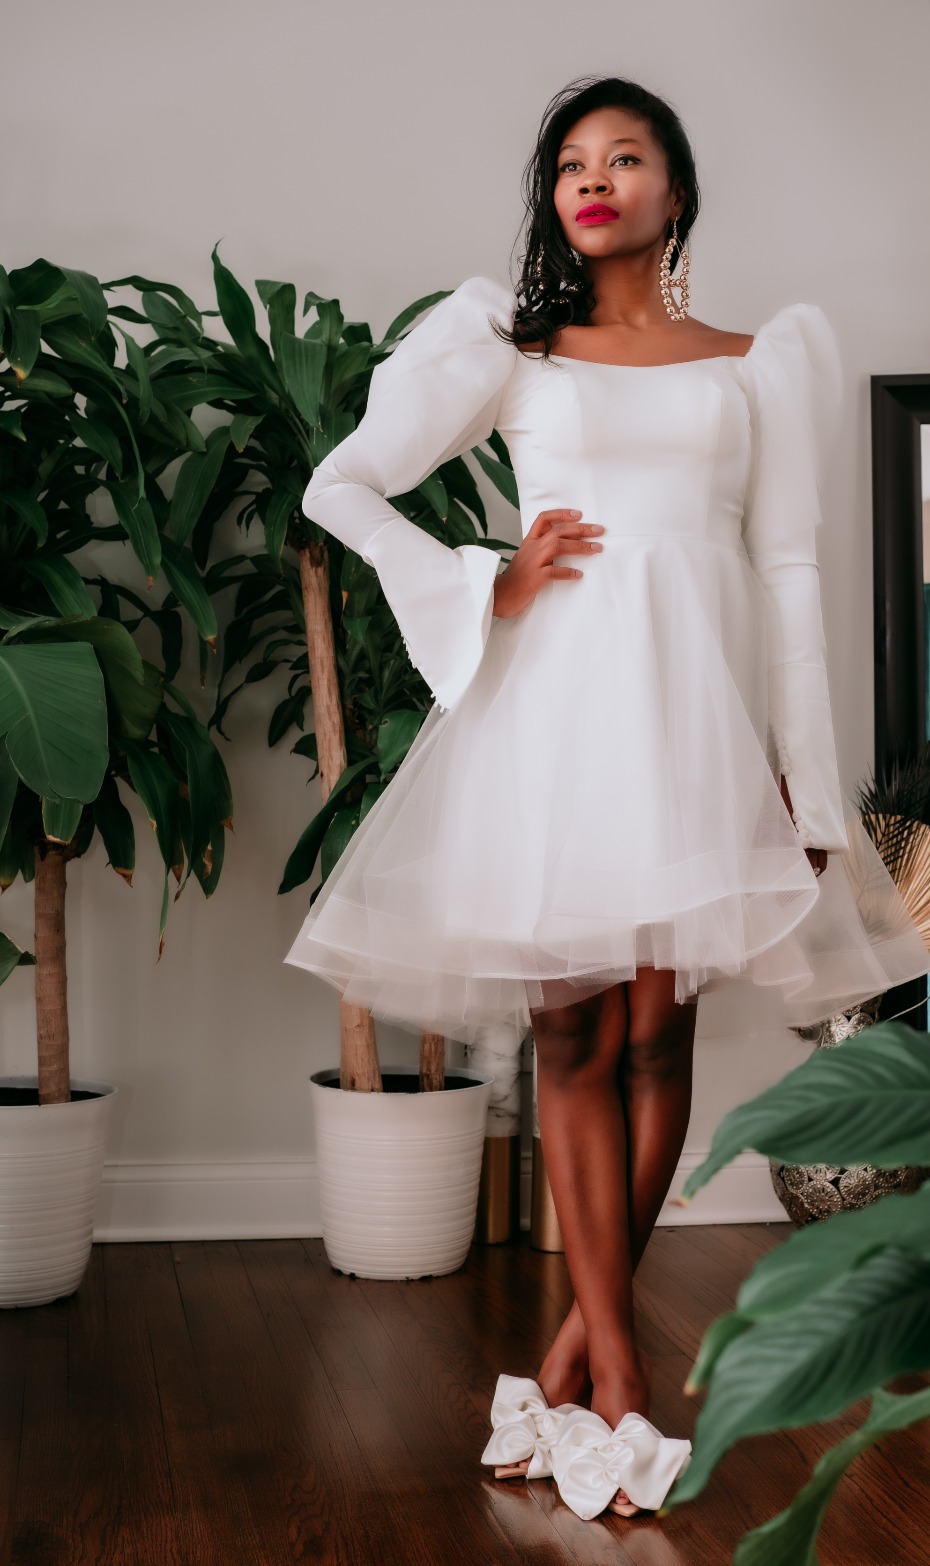 Project Runway's Laurie Underwood Launches New Collection Of Bridal Separates